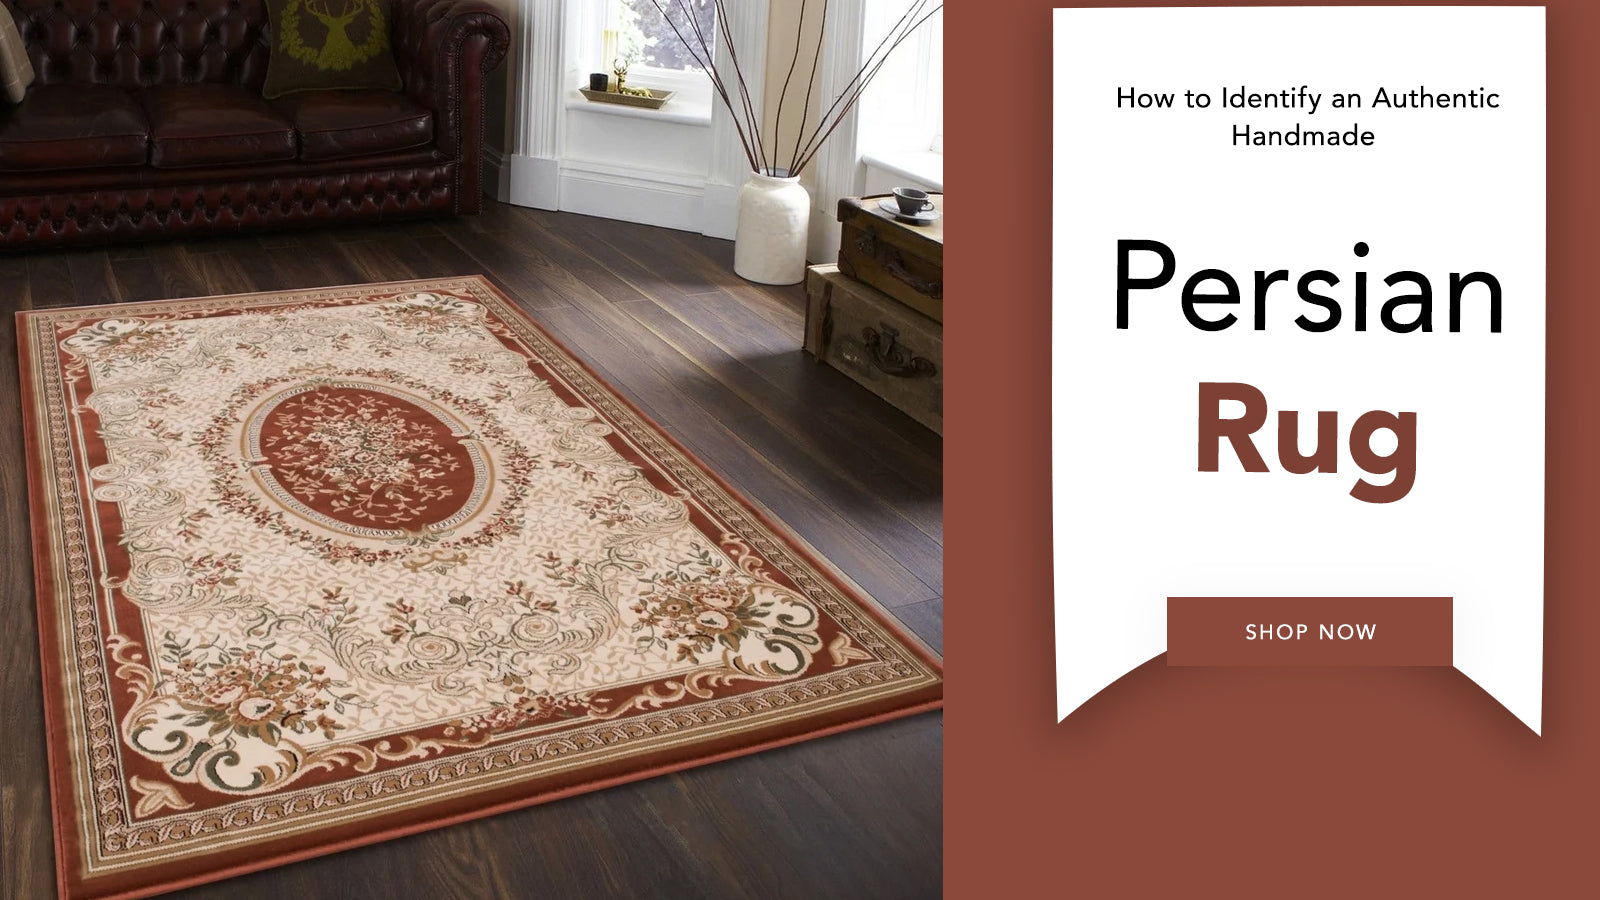 Buyer's Guide For Oriental Rug / Rugknots